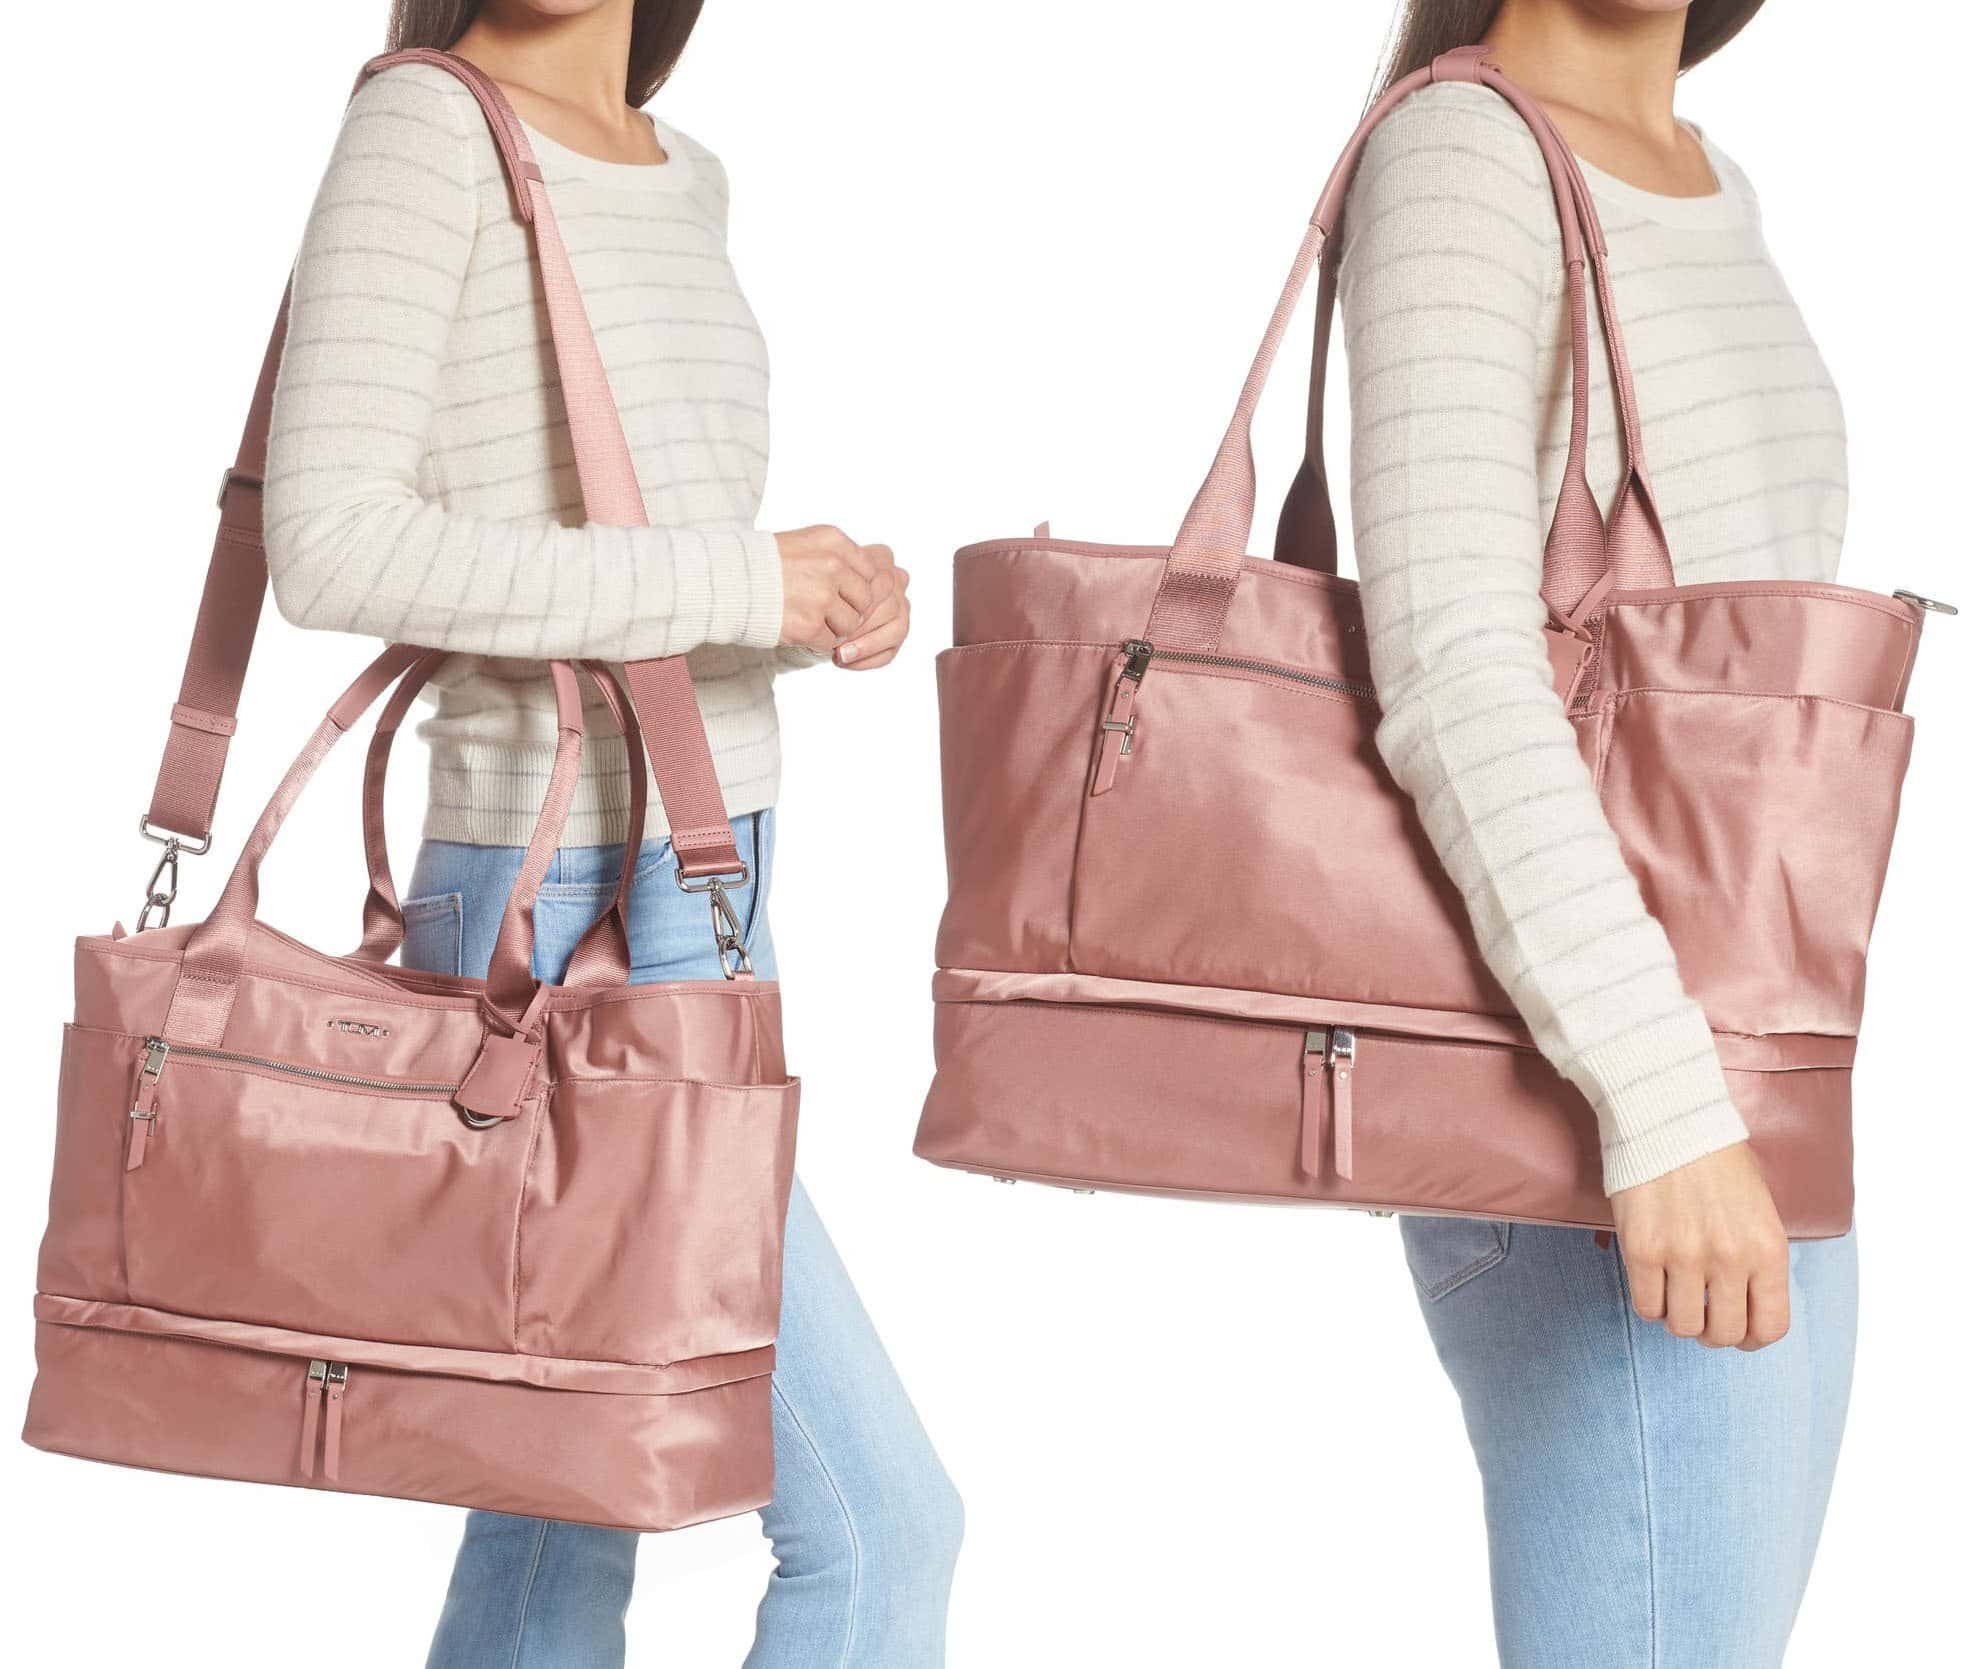 For daily commuters and frequent flyers, Tumi's Clearly Weekend Nylon tote offers style and plenty of space for more than just your essentials